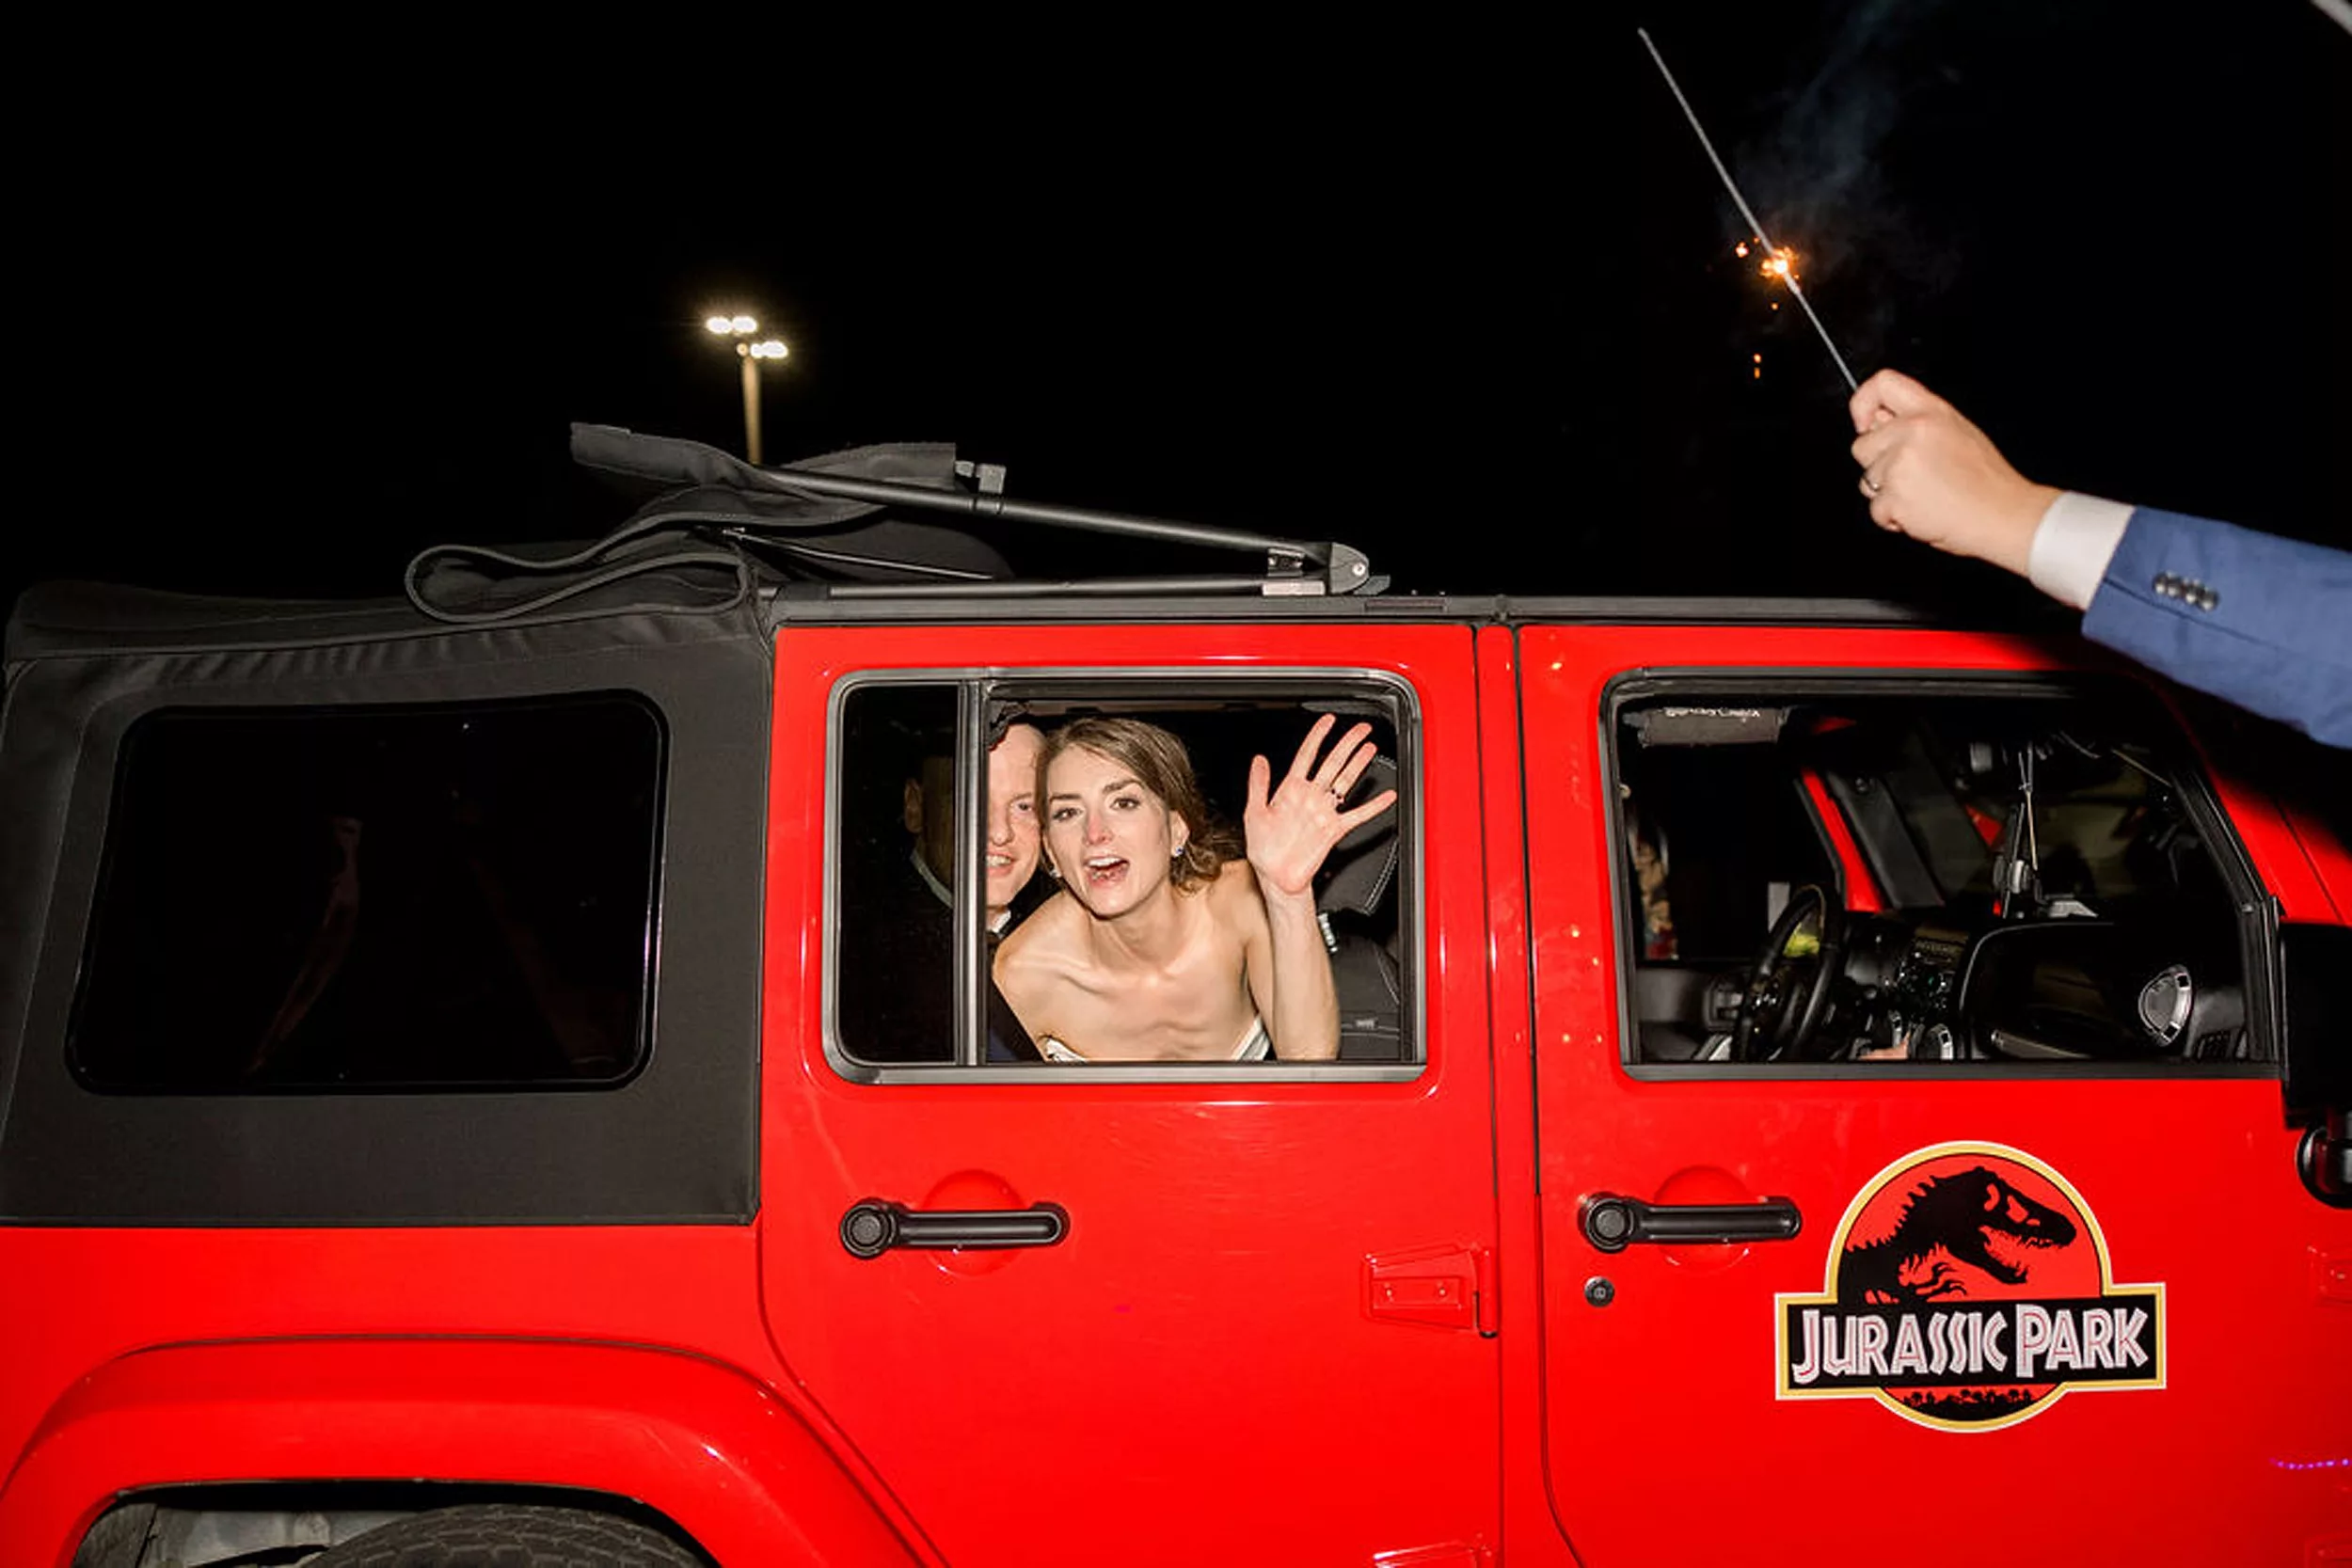 A Red Jurassic Park Jeep leaves a wedding as the bride waves to her guests with sparklers